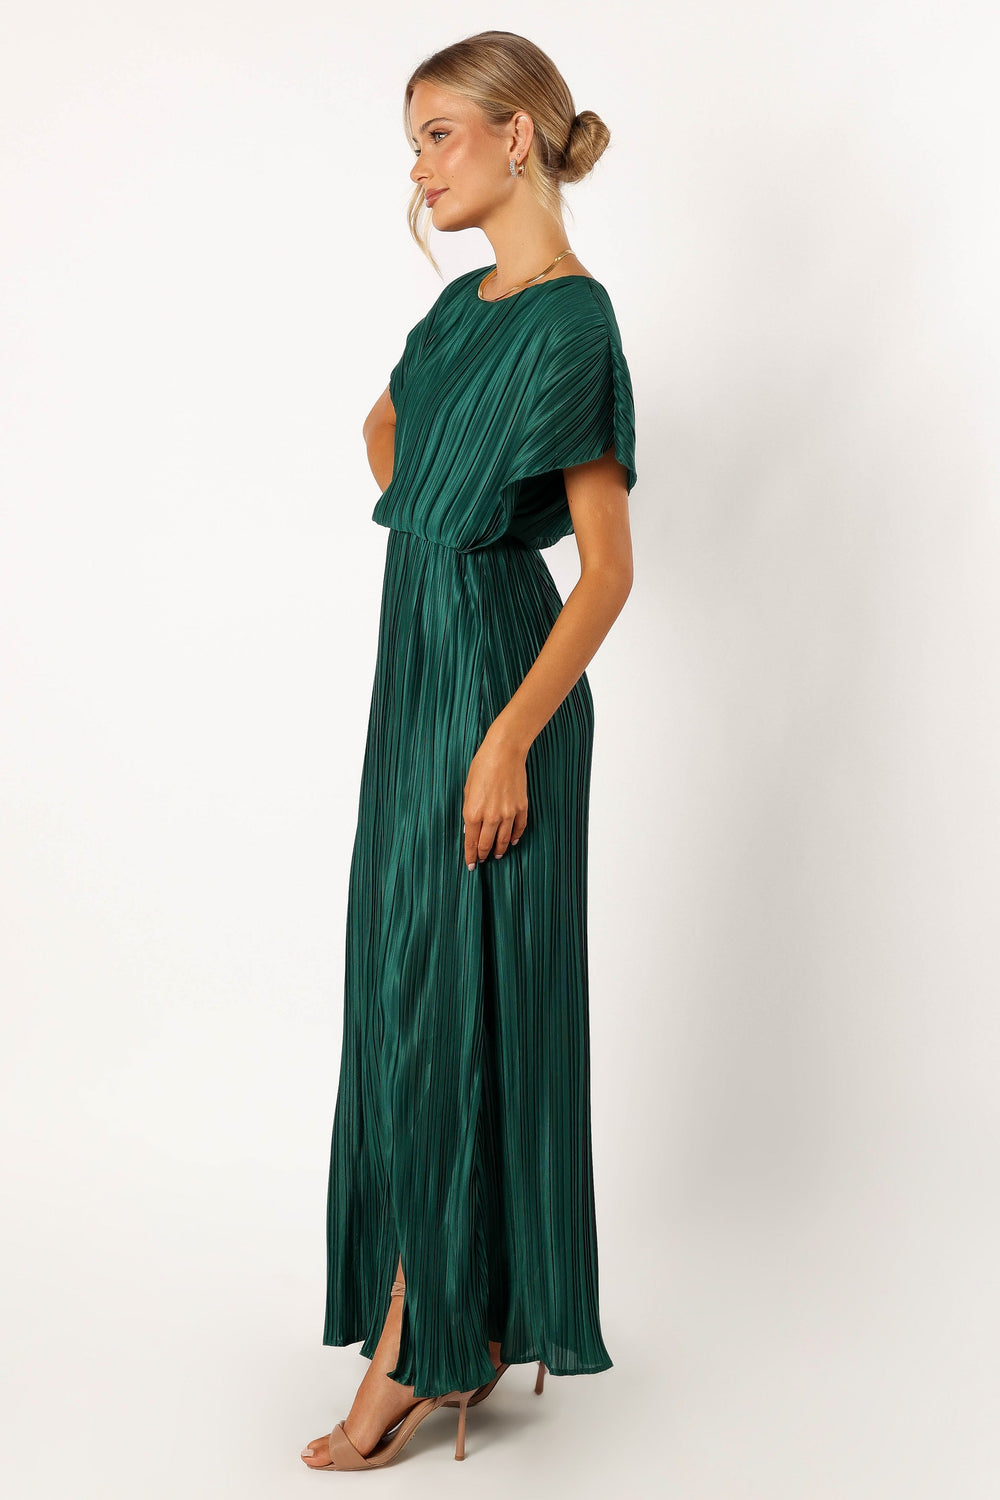 Petal and Pup USA DRESSES Neville Pleated Maxi Dress - Teal Green